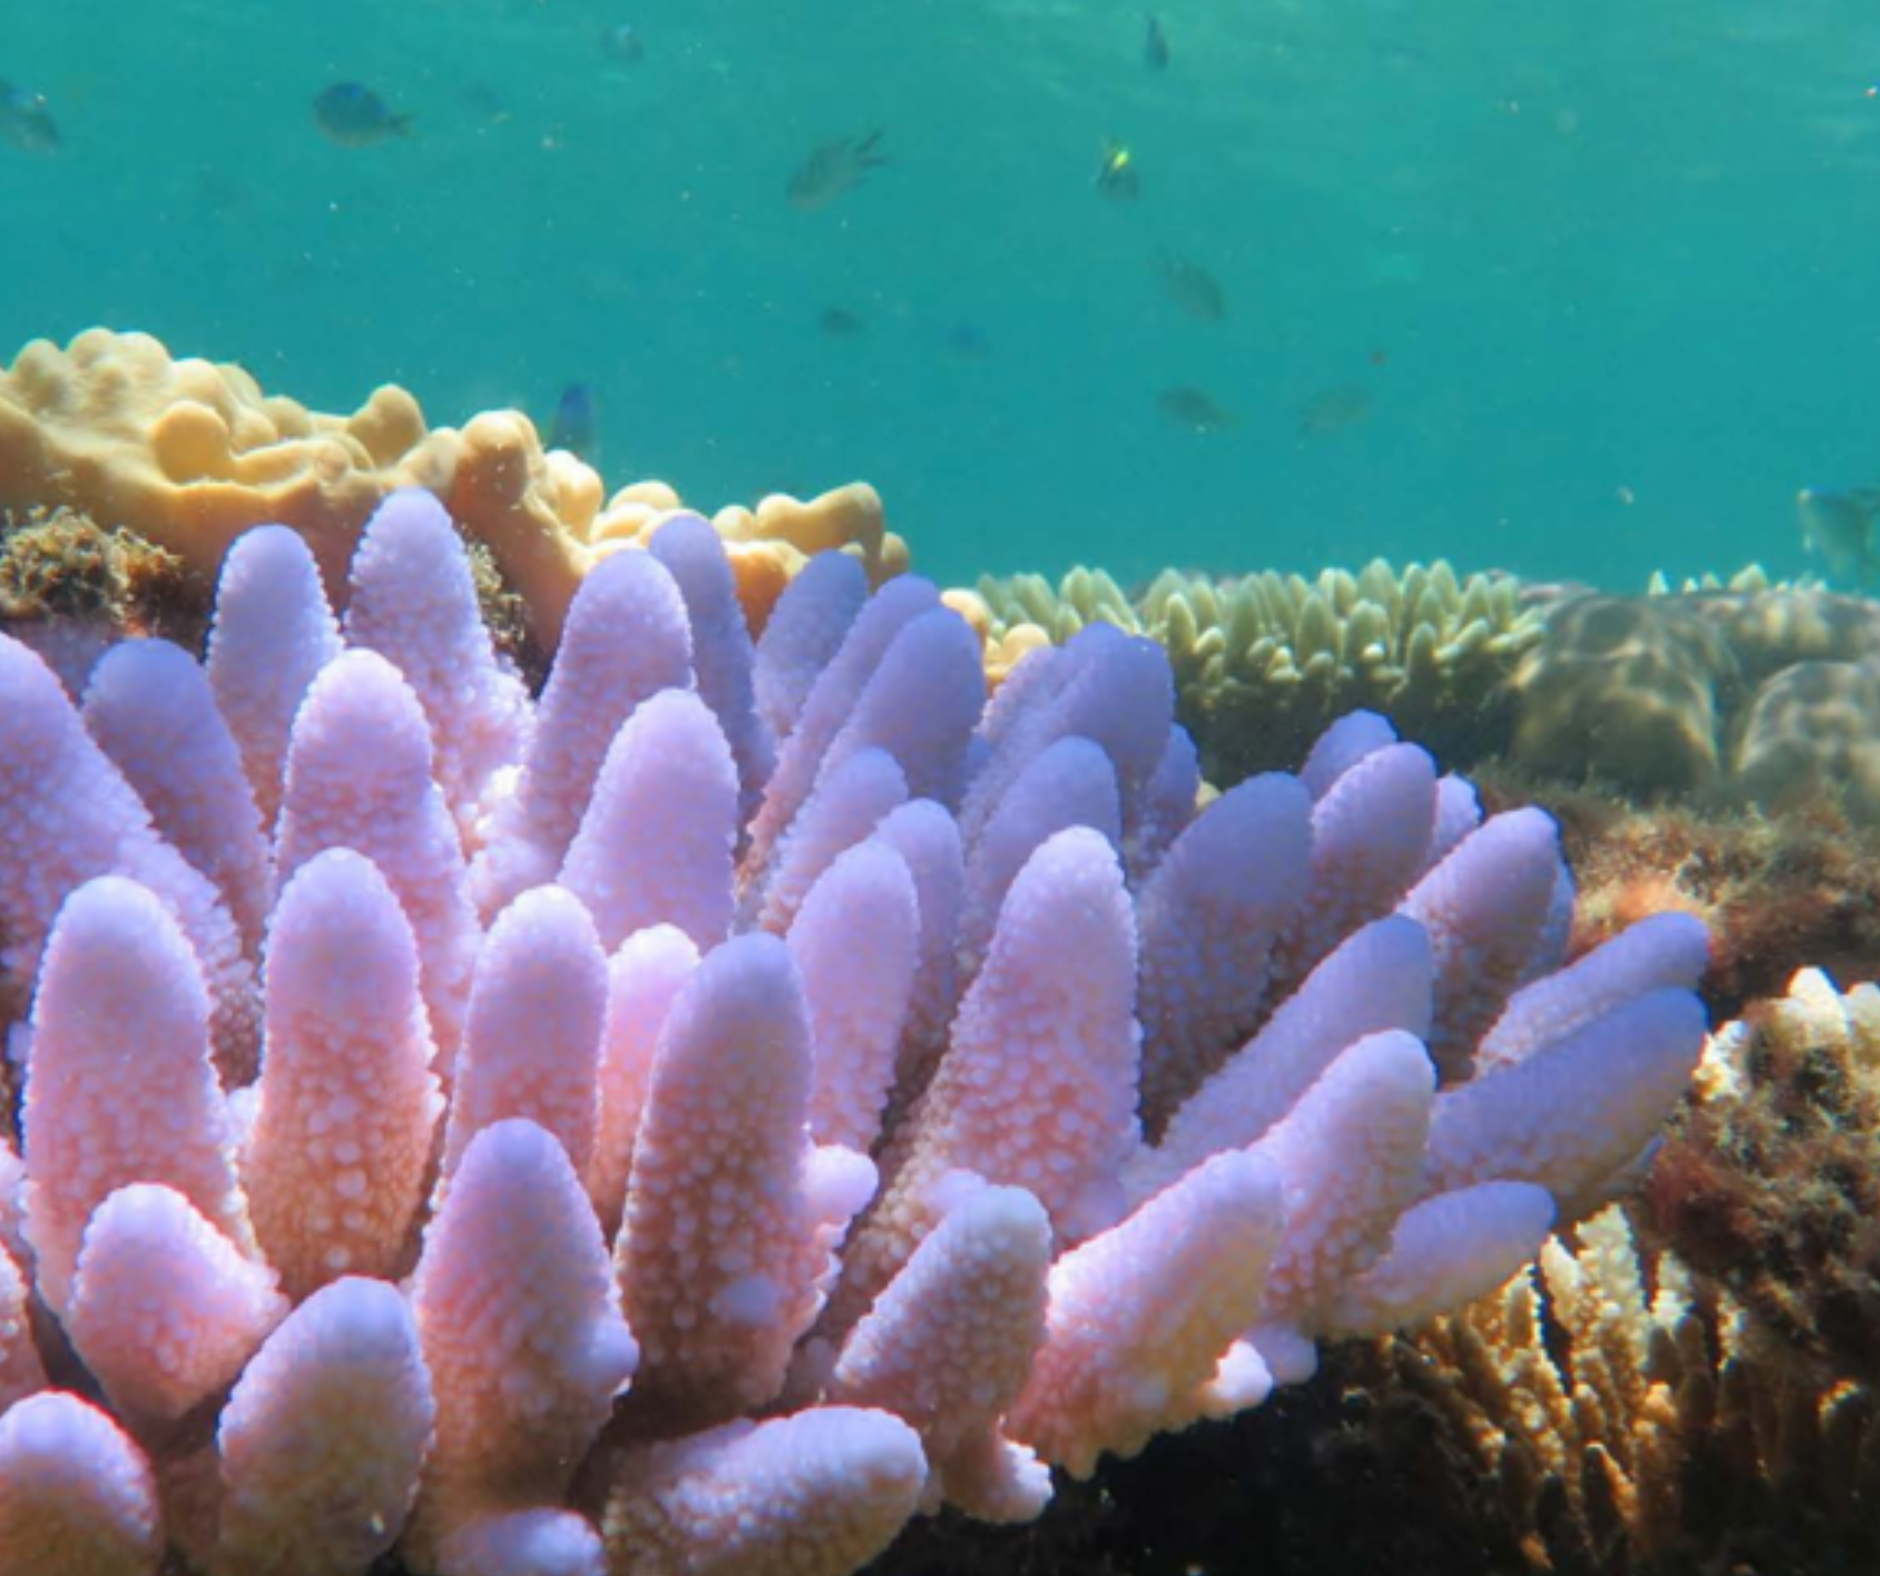 Climatic factors affecting the Great Barrier Reef